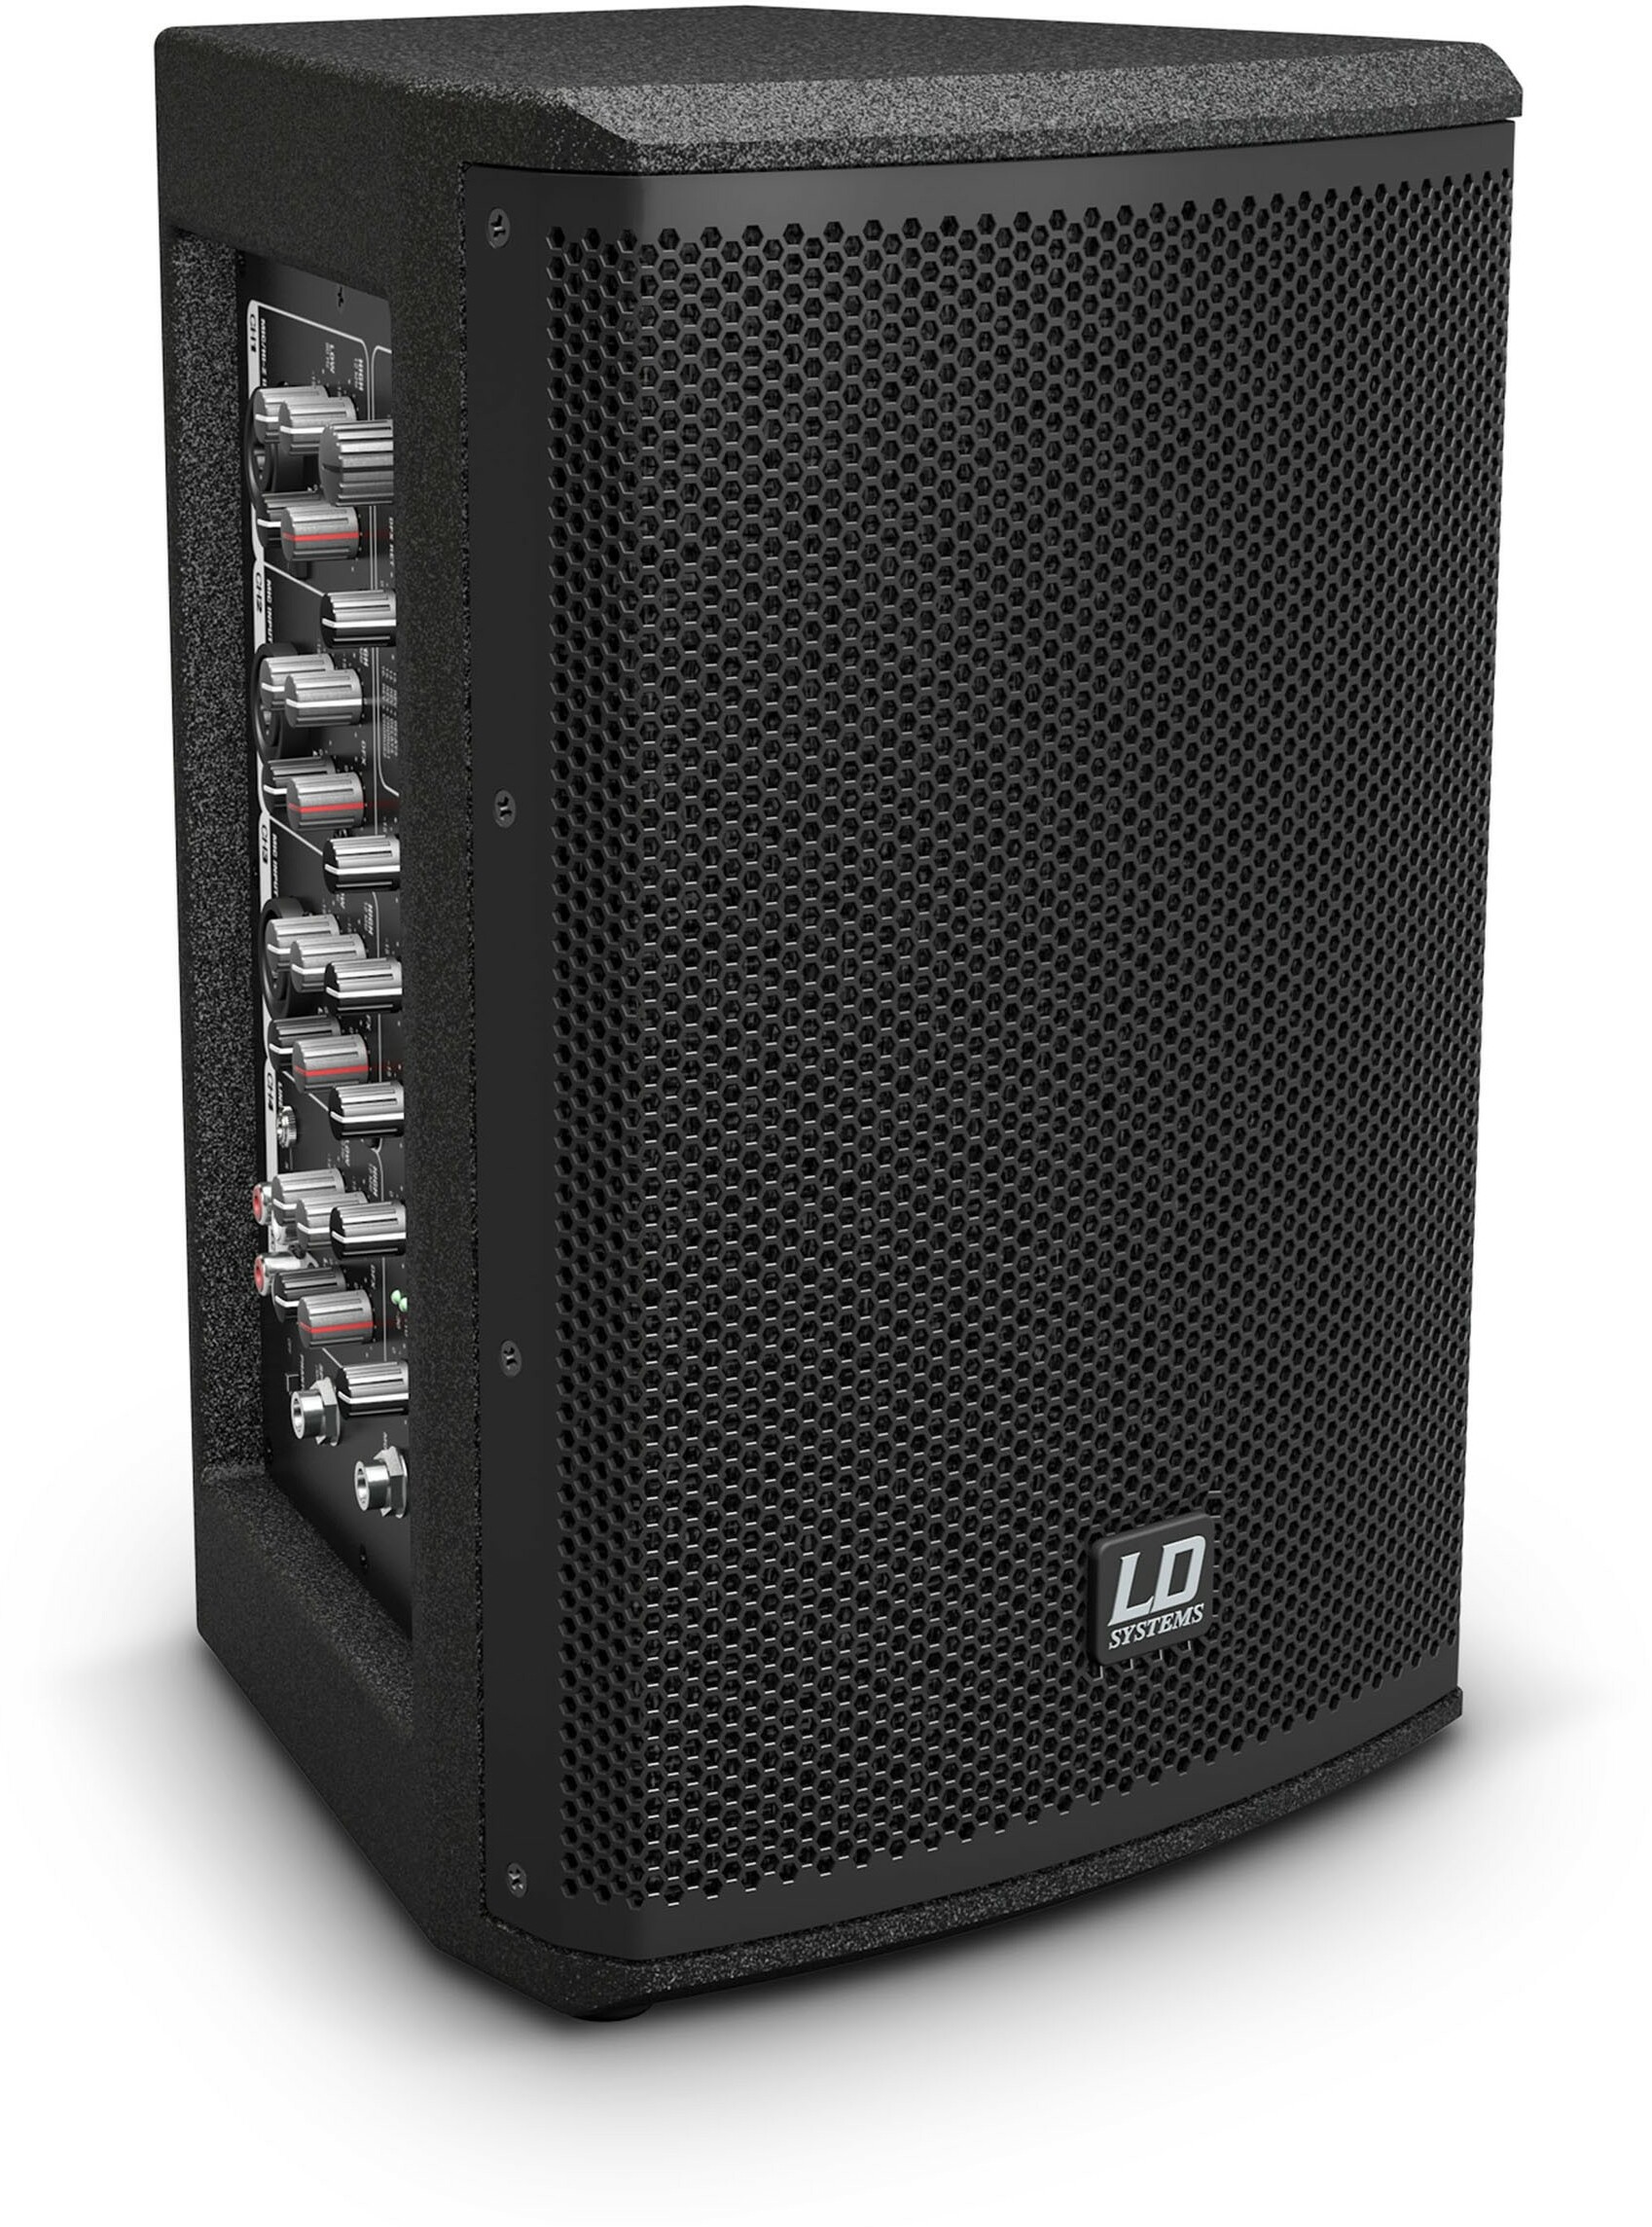 Ld Systems Mix 6 A G3 - Portable PA system - Main picture